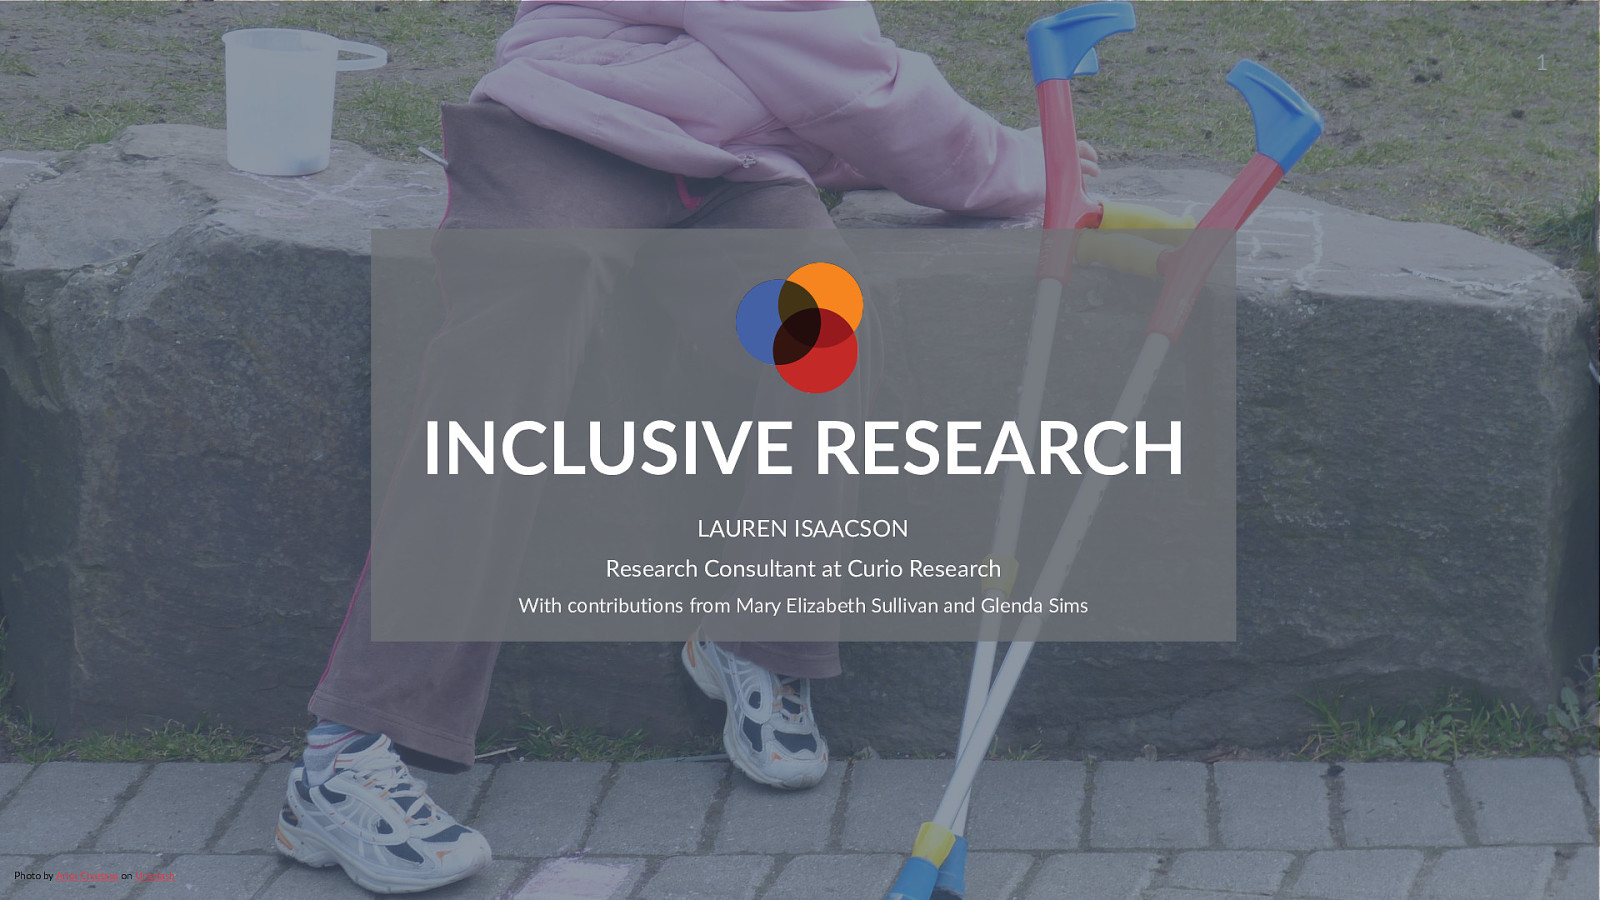 Inclusive Research: Making research accessible to people with disabilities